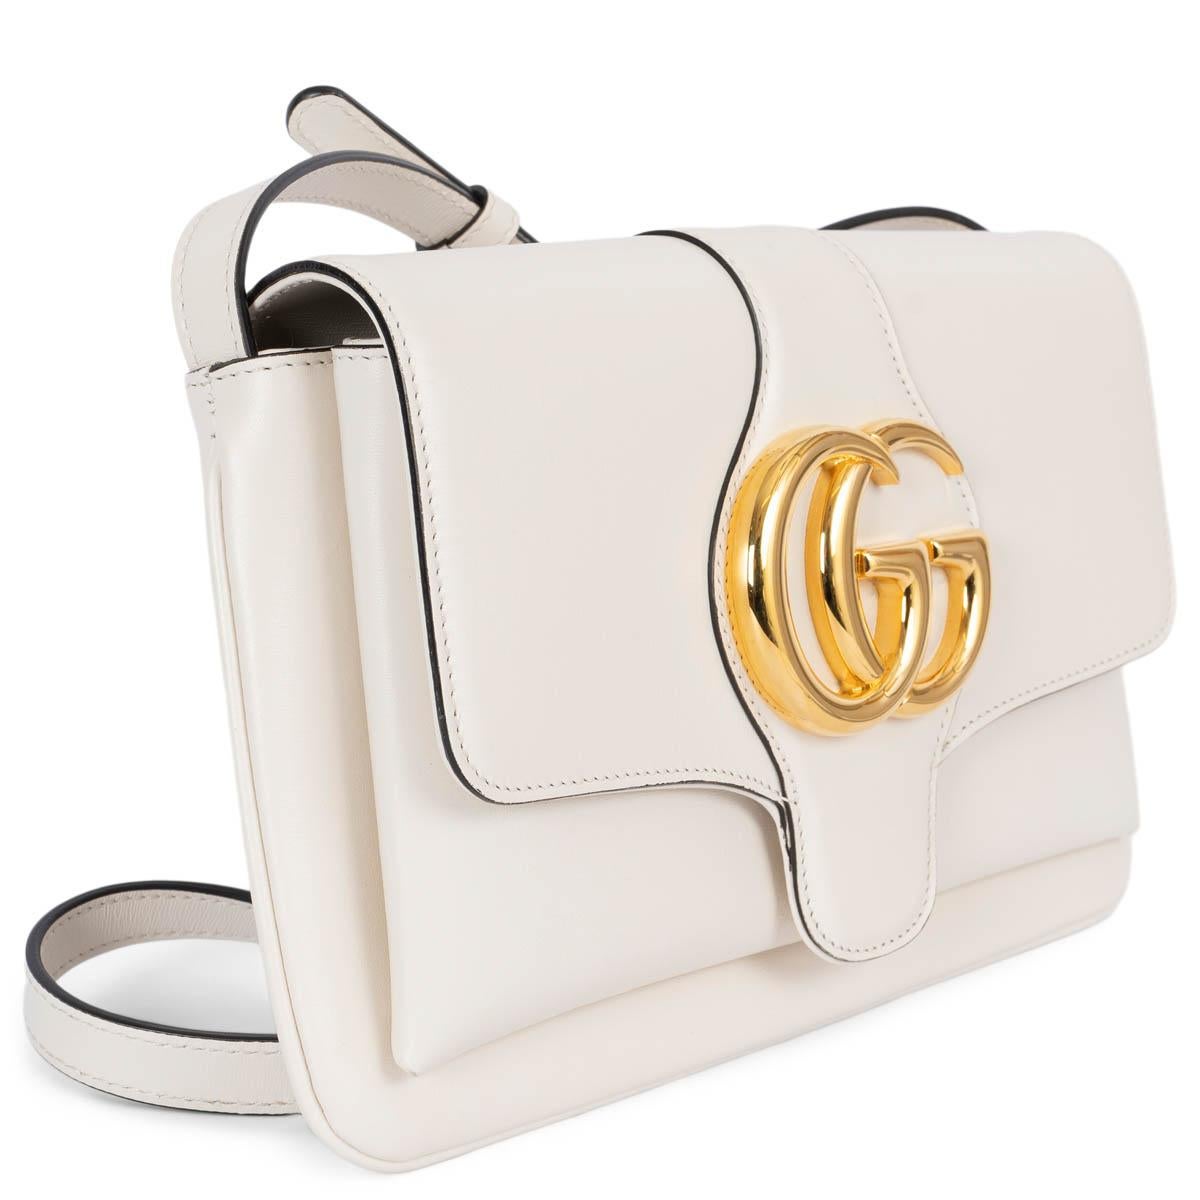 100% authentic Gucci Small Arli flap bag in white calfskin featuring gold-tone hardware. The interior is lined in a light pink grosgrain fabric and divided in two compartments with one zipper pocket against the back. Has been carried and shows some